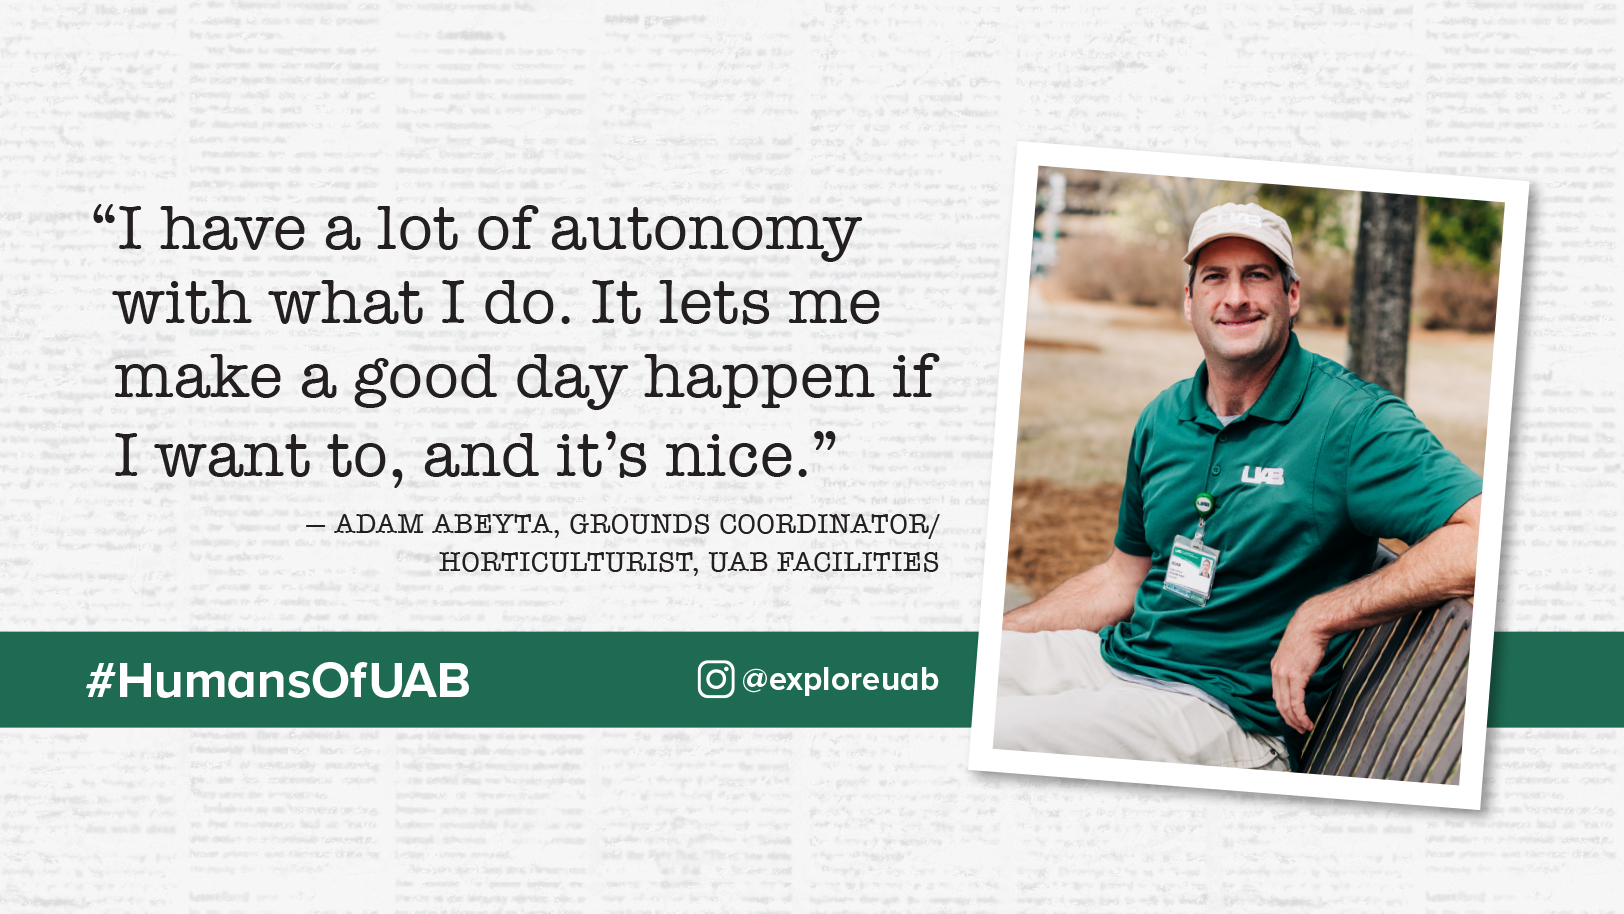 "I have a lot of autonomy with what I do. It lets me make a good day happen if I want to, and that's nice." -Adam Abeyta, Grounds Coordinator/Horticulturist, UAB Facilities, Humans of UAB.